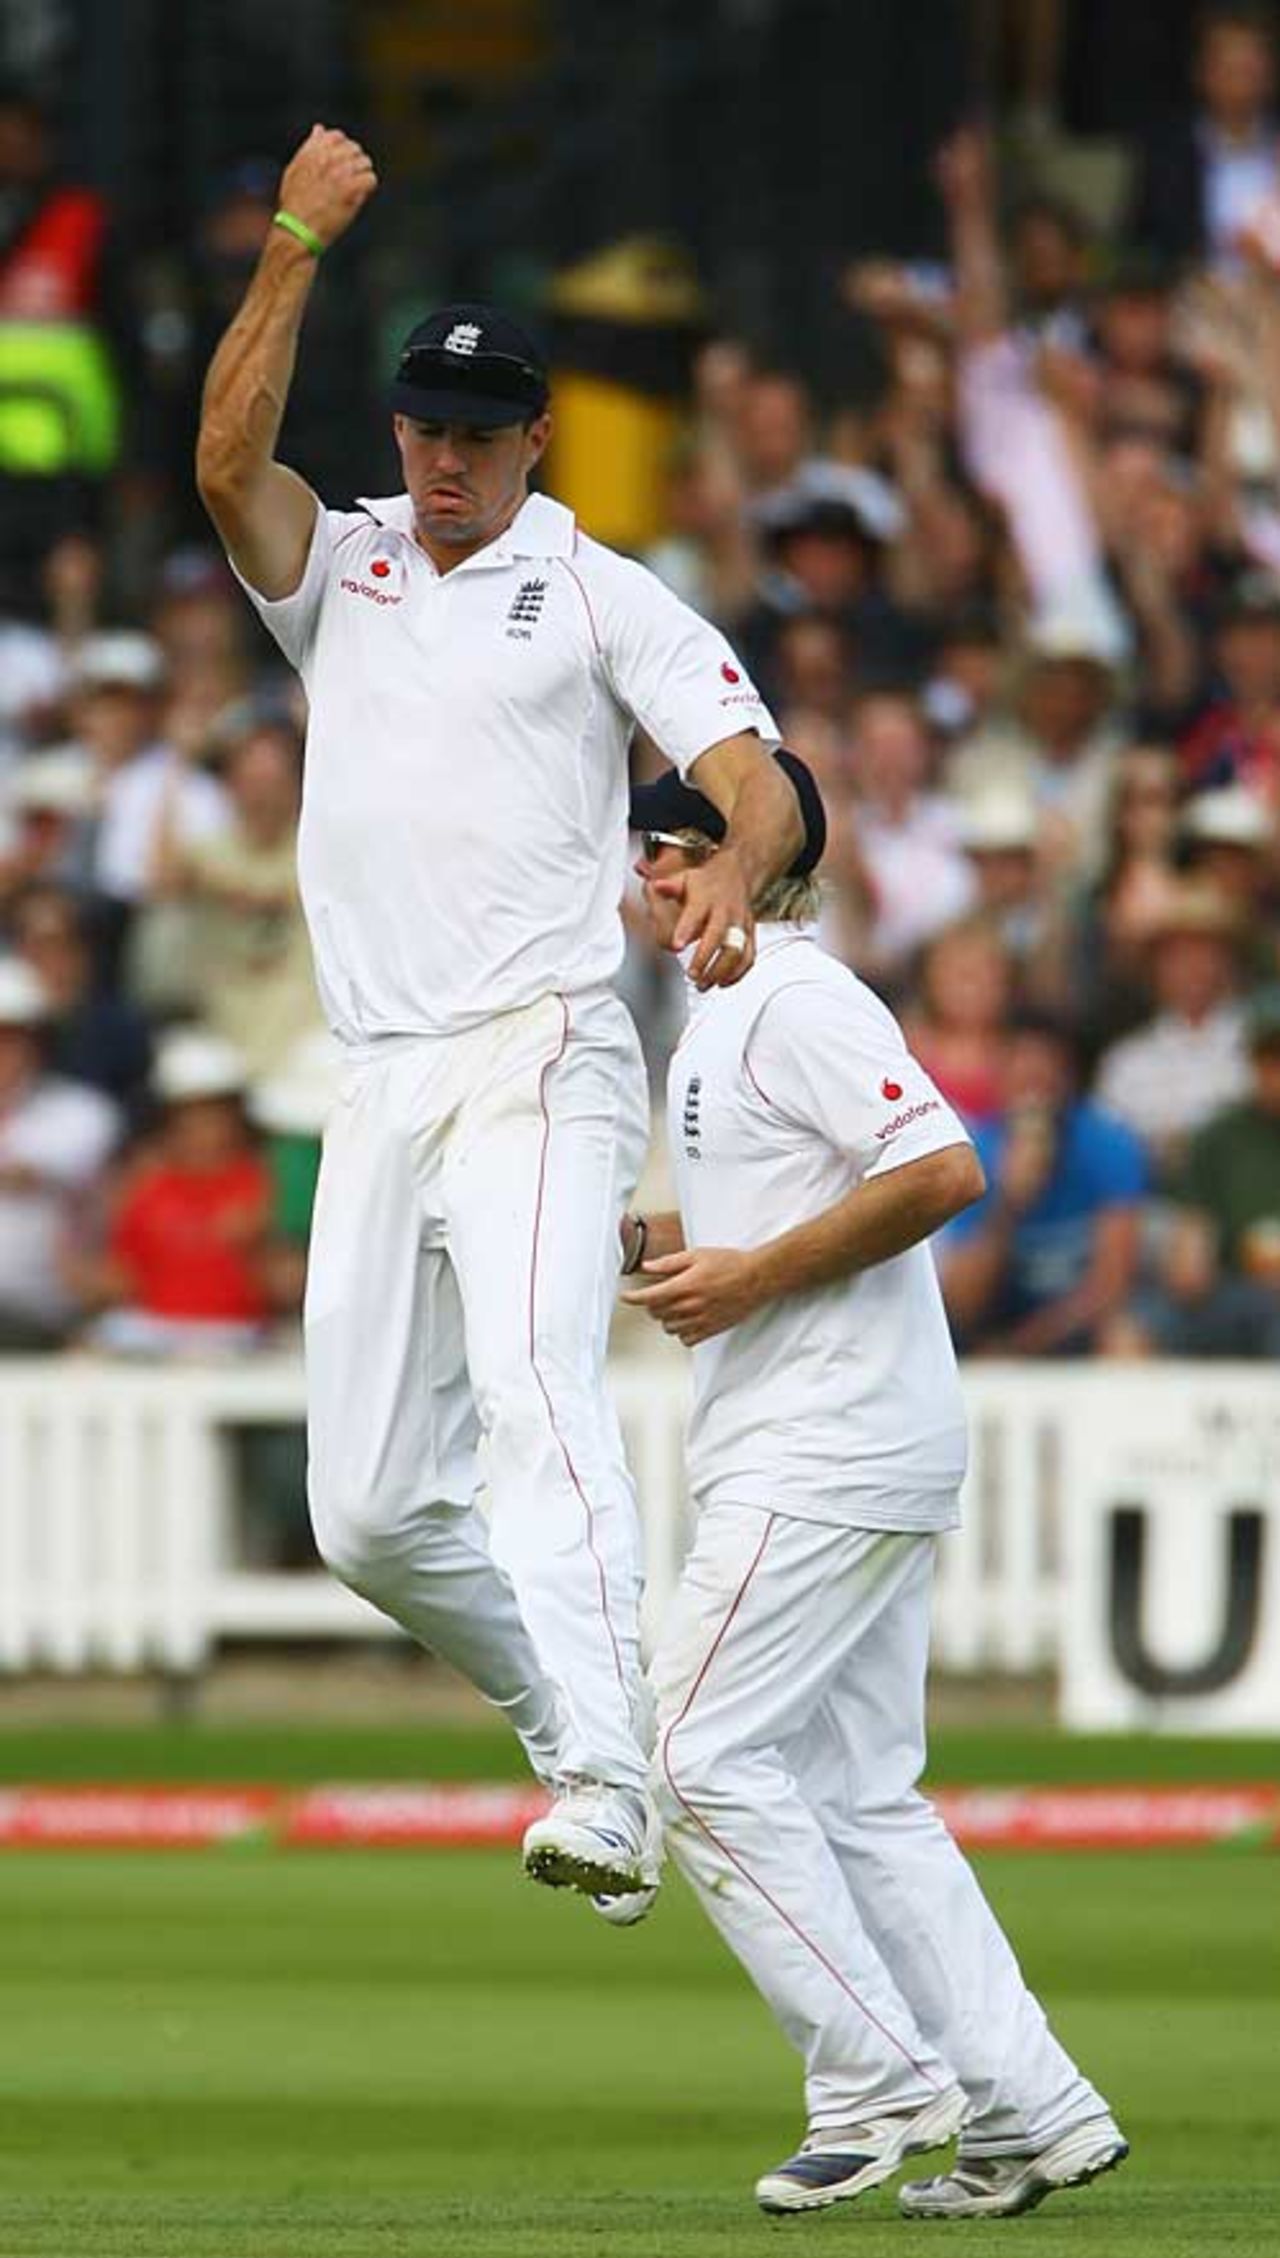 Kevin Pietersen takes the catch to remove Graeme Smith, England v South Africa, 1st Test, Lord's, 4th day, July 13, 2008